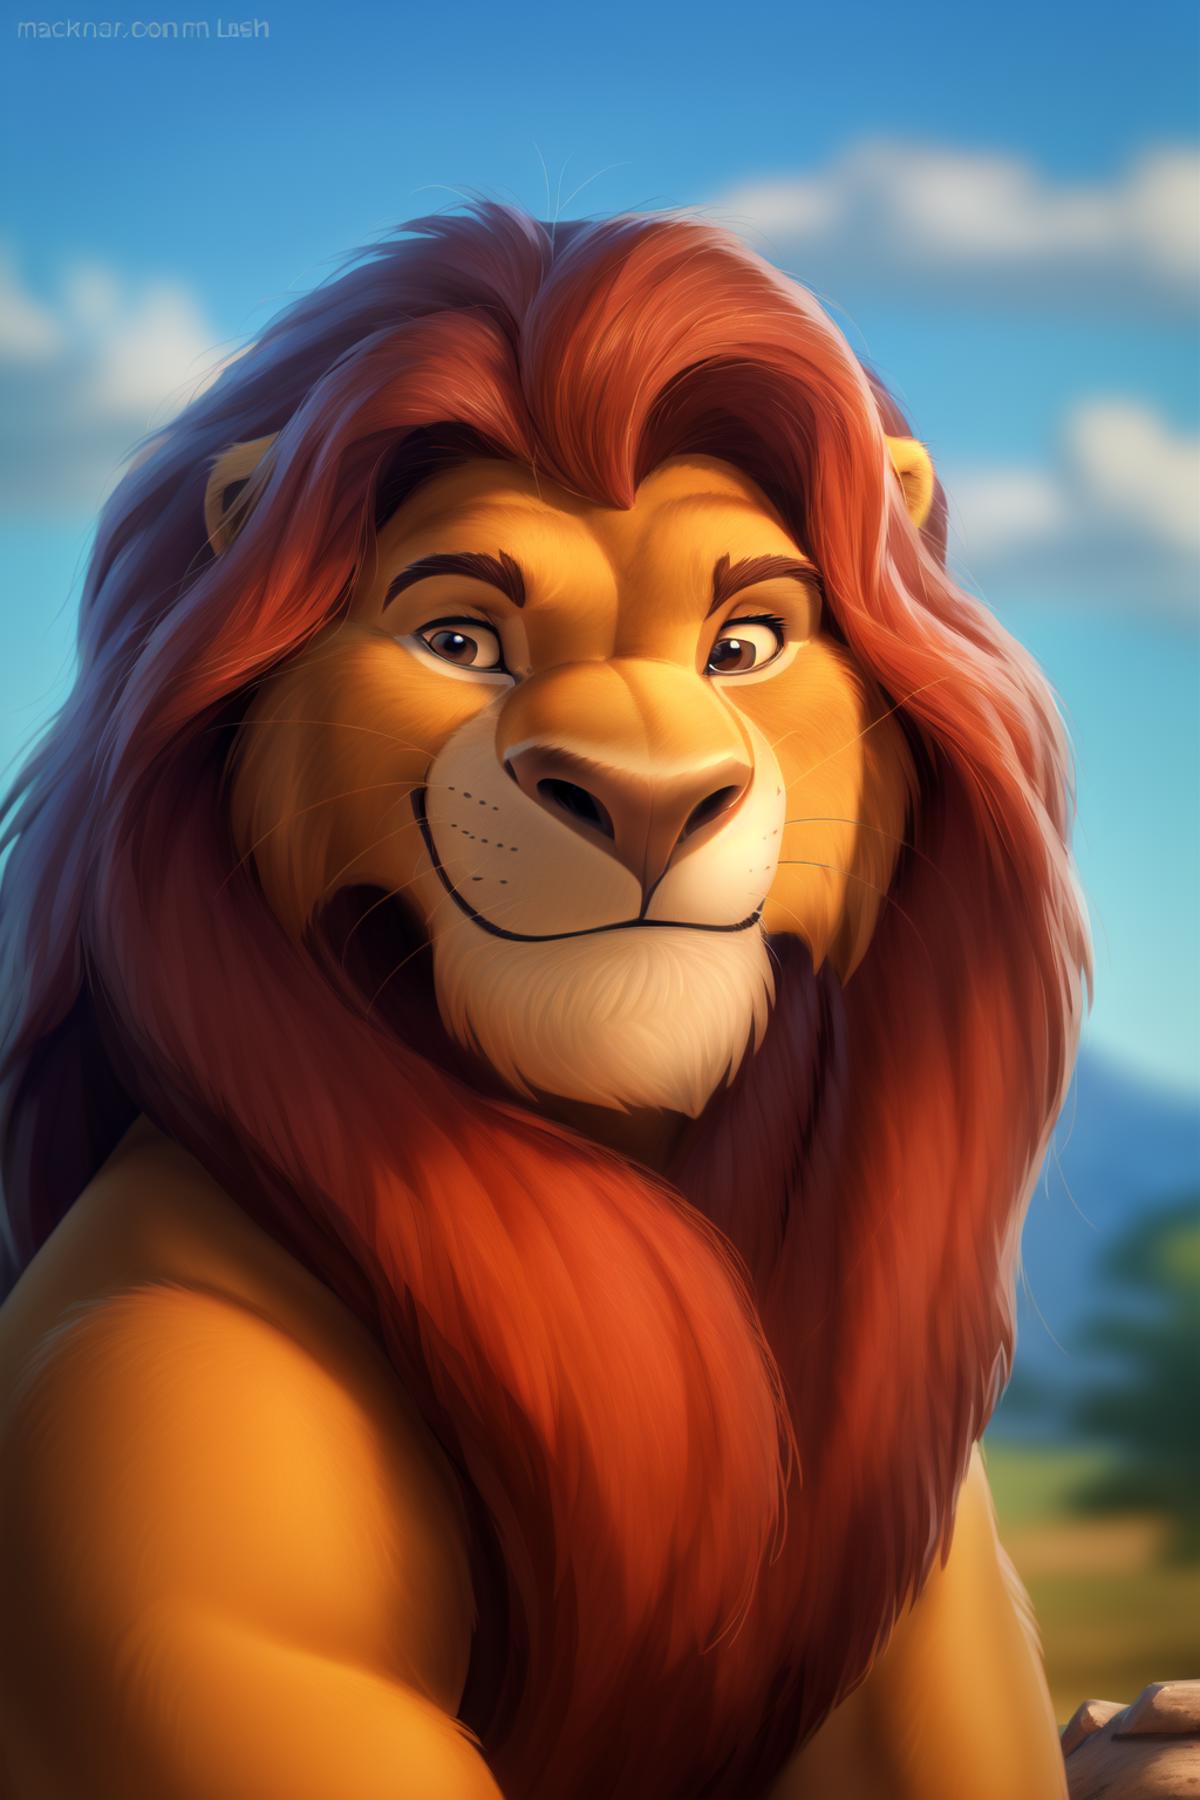 Mufasa - The Lion King image by Orion_12